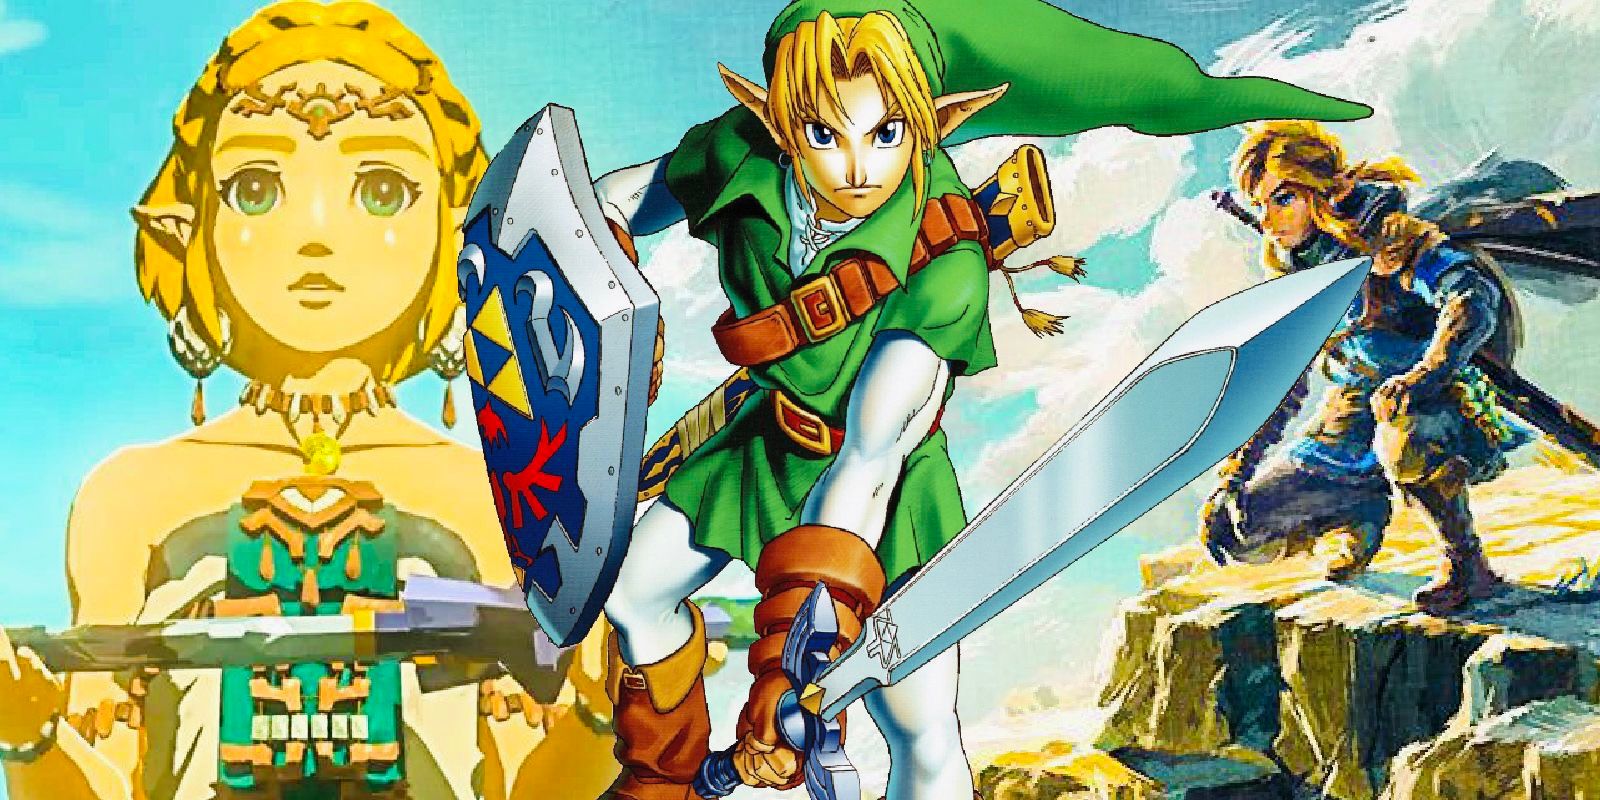 More Sequels Should Follow the Footsteps of The Legend of Zelda: A